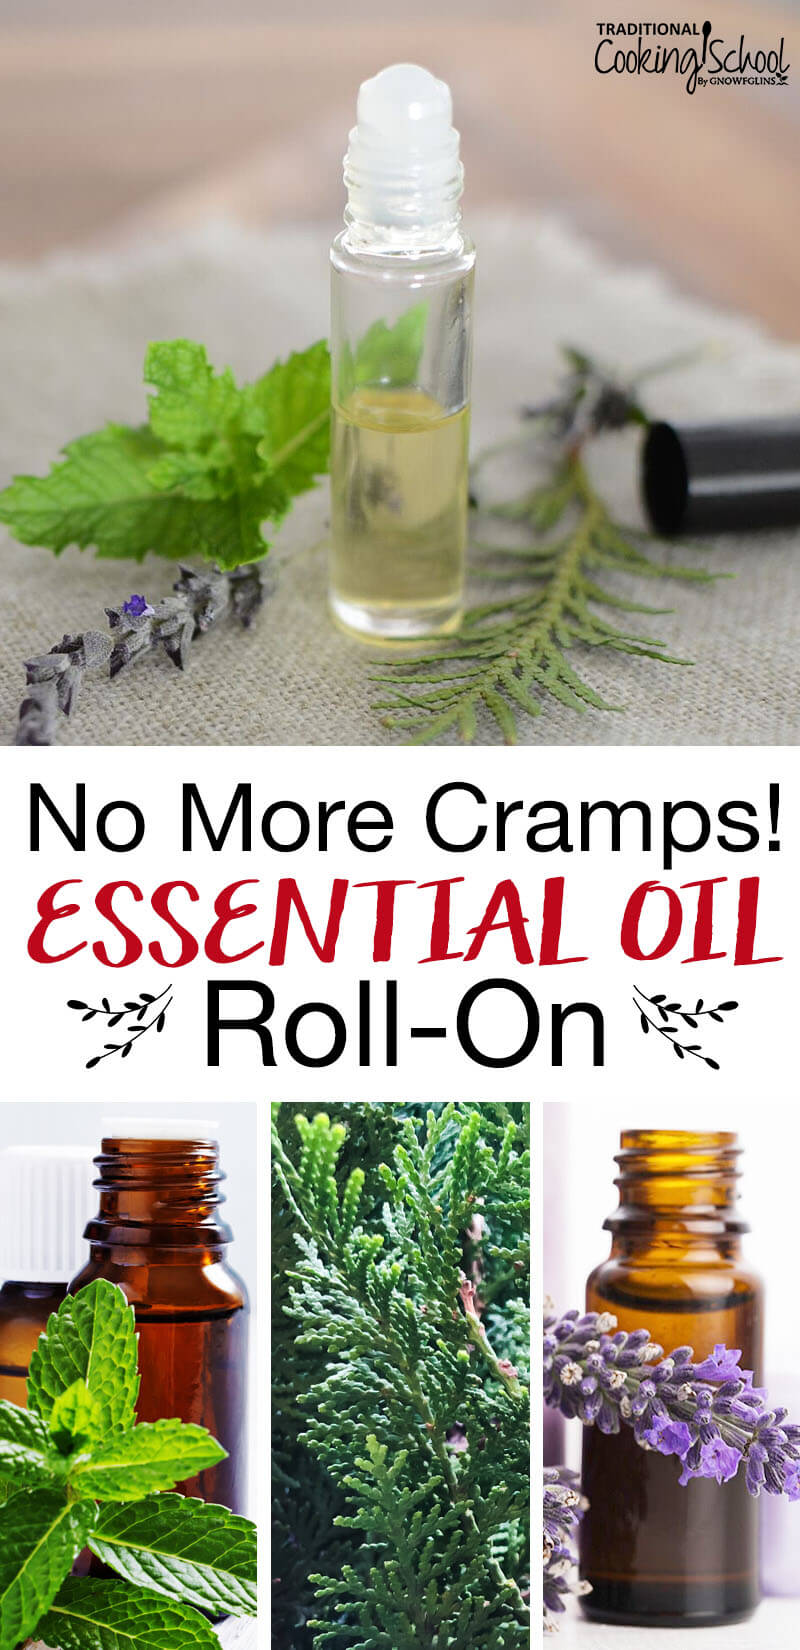 No More Cramps! Essential Oil Roll-On | Argh...cramps. They can feel like your uterus and ovaries are staging a coup. Conventional medicine prescribes over-the-counter pain meds and even hormonal birth control for relief. Is there a better way? This essential oil roll-on brings natural relief for stomach and back cramps before and during your period. | TraditionalCookingSchool.com